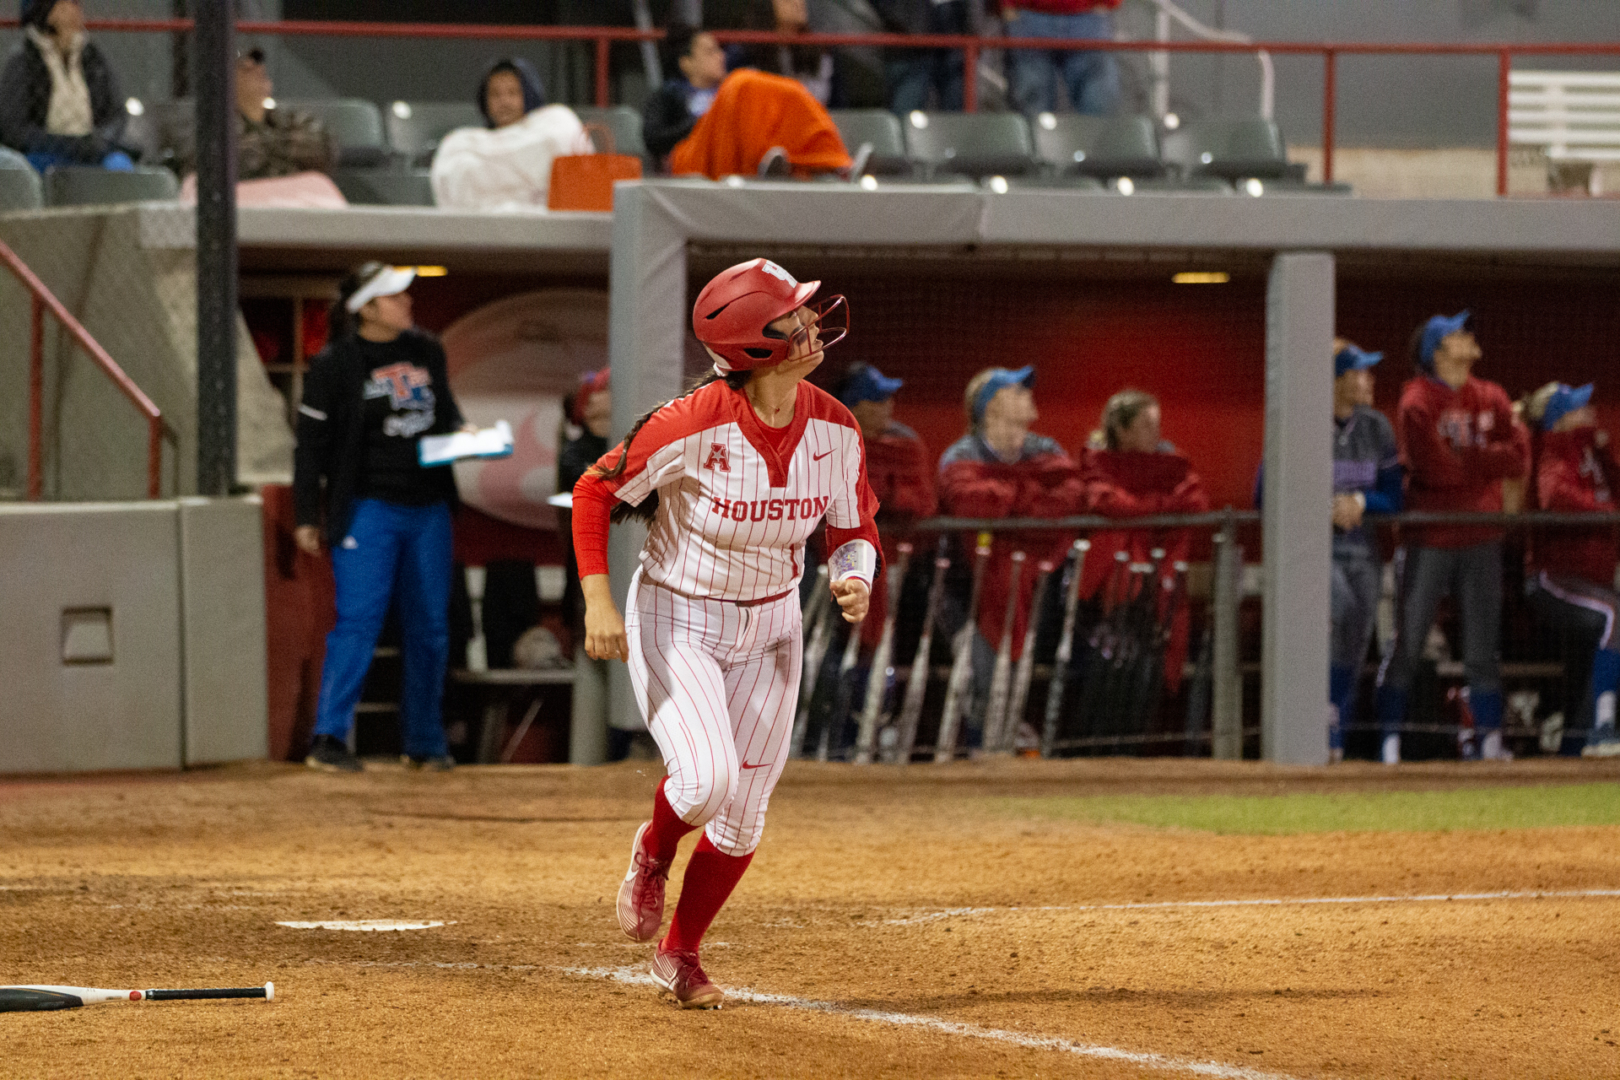 UH softball split its weekend series against Memphis to move to 15-30 overall on the season | Deaunte Johnson/The Cougar